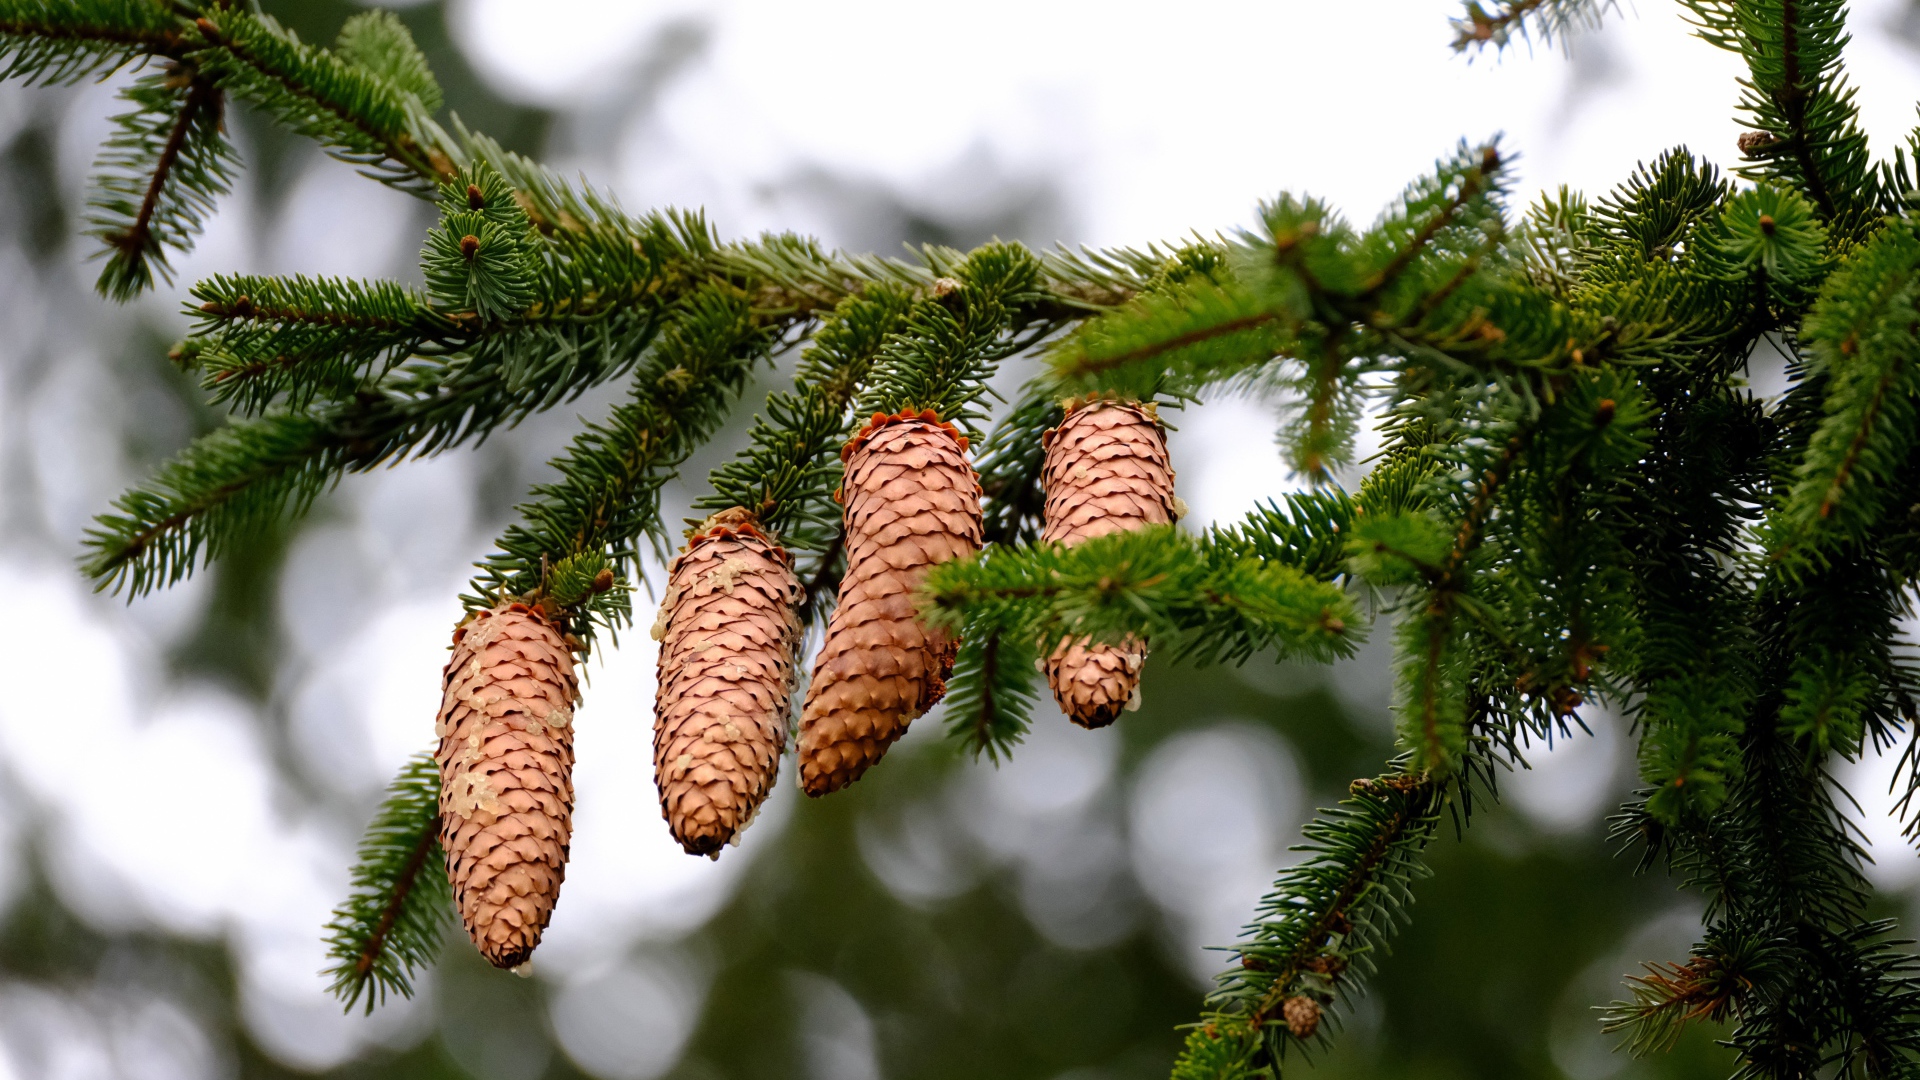 Big brown cones on a green spruce branch